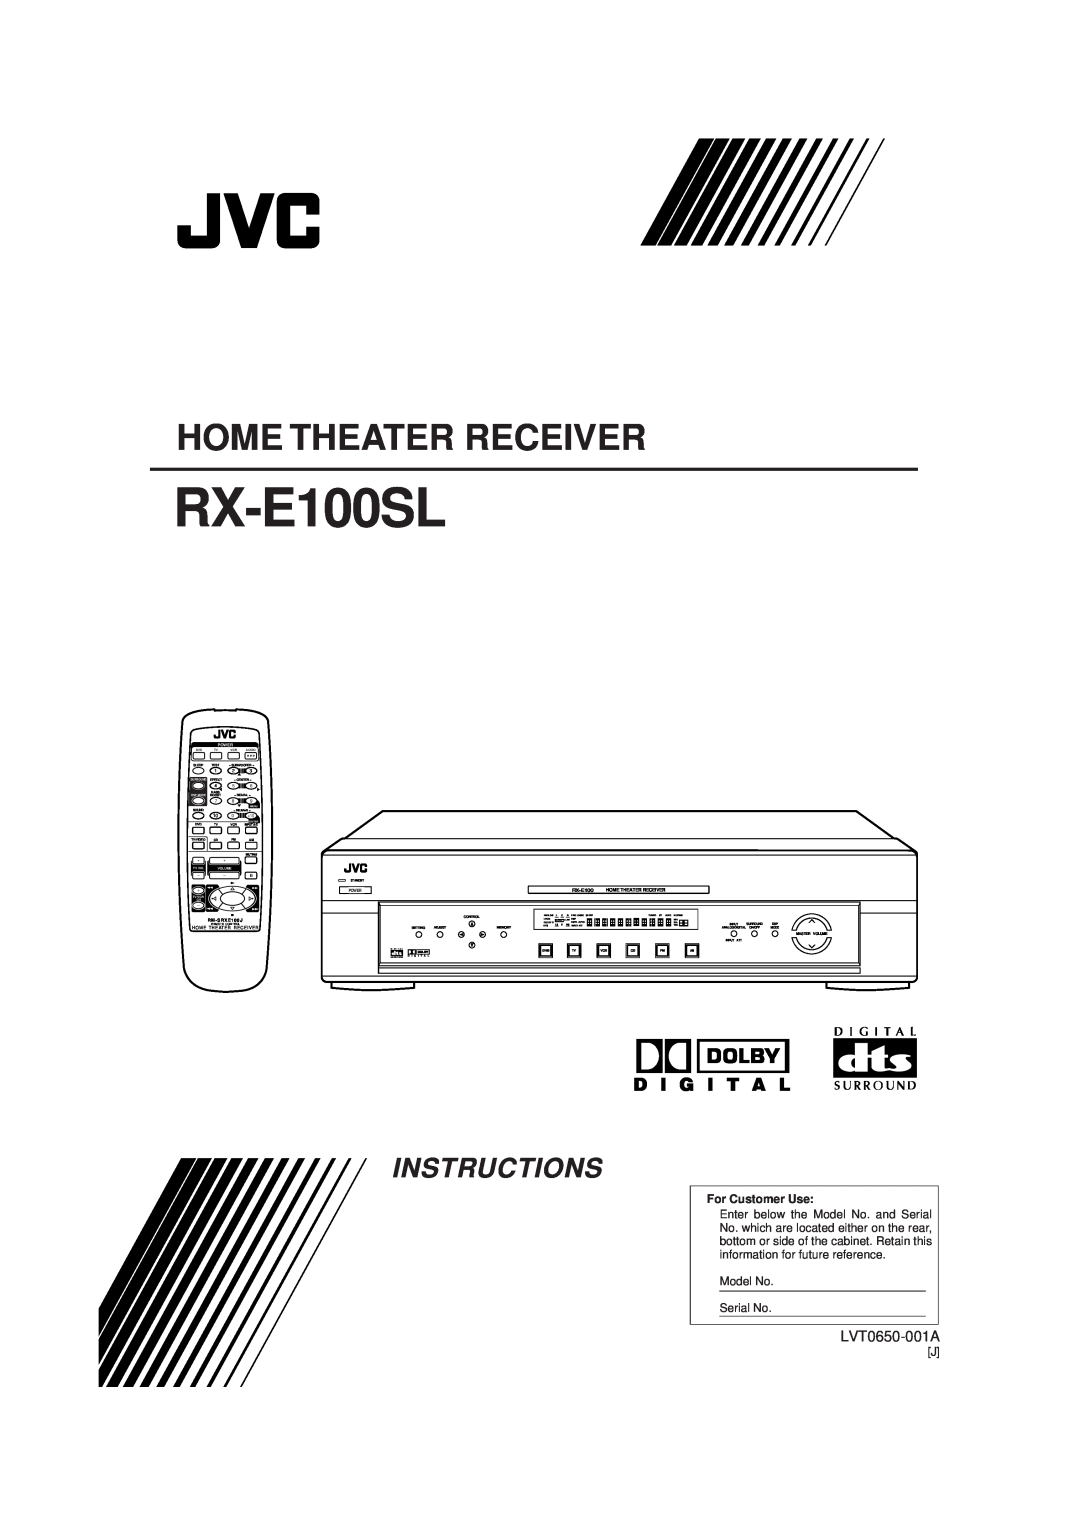 JVC RX-E100SL manual D I G I T A L, LVT0650-001A, Home Theater Receiver, Instructions, For Customer Use, Power 